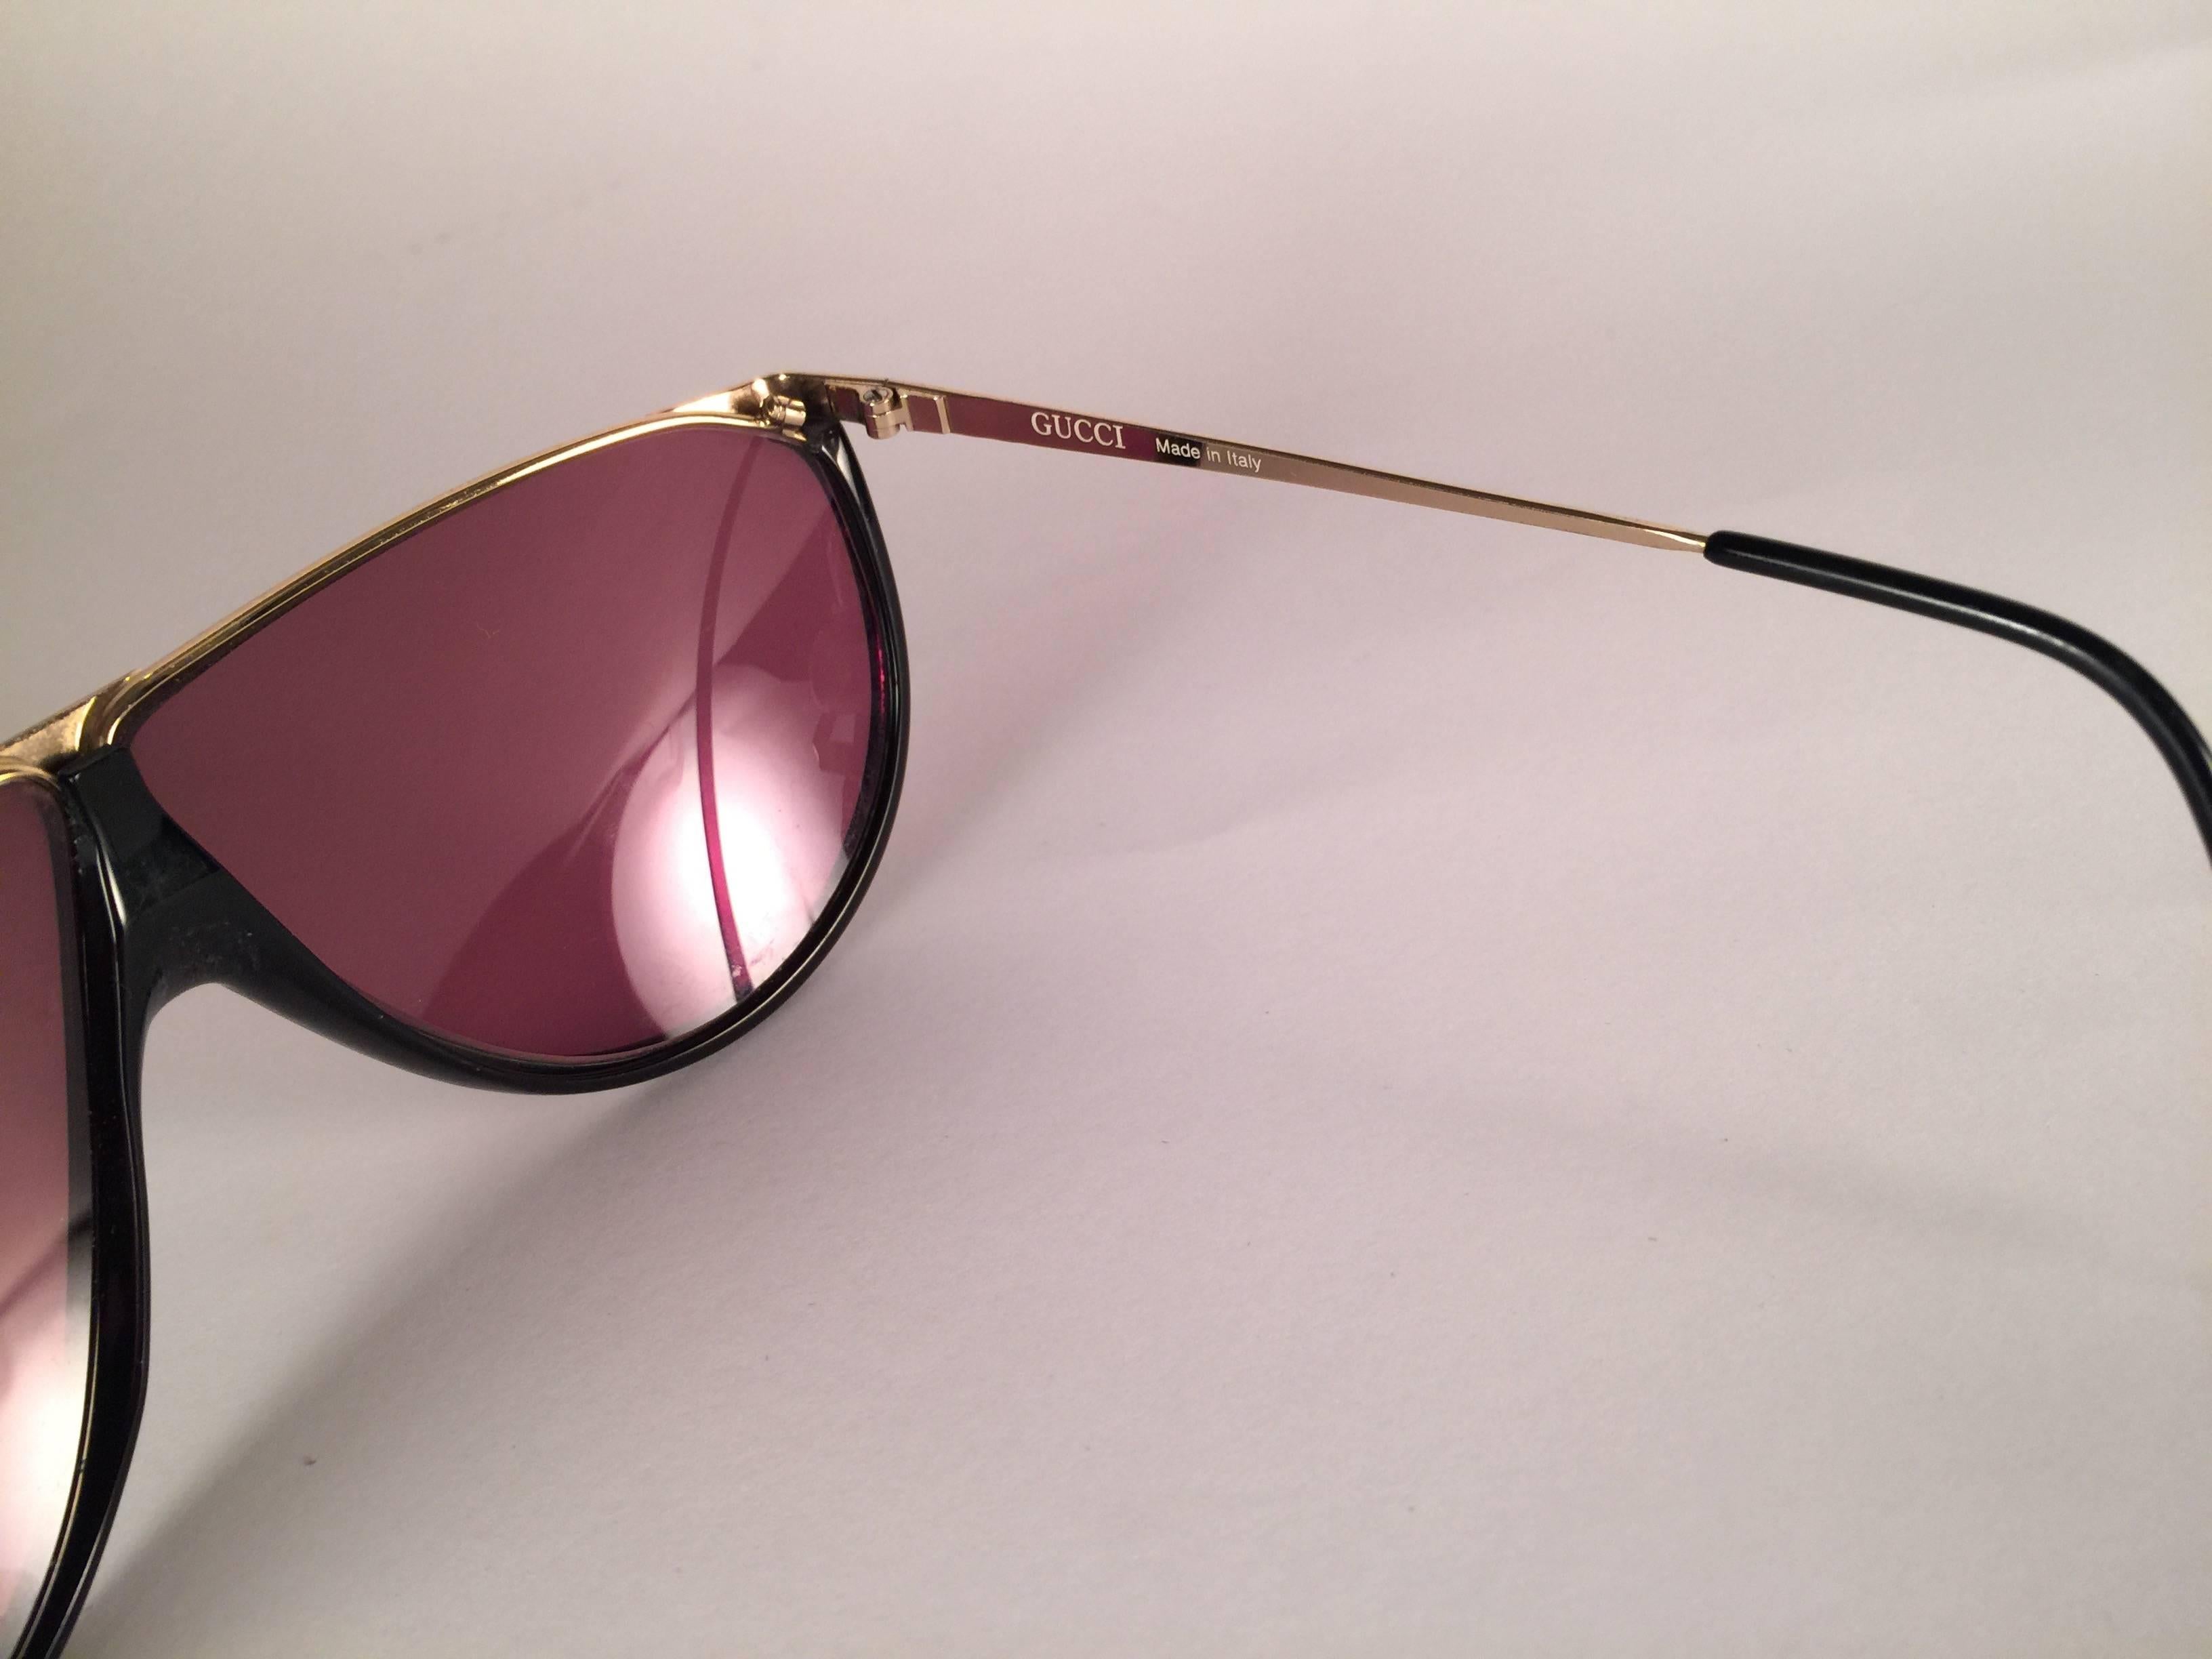 Women's or Men's New Vintage Gucci GG 1305 Black & Gold Sunglasses 1980's Made in Italy